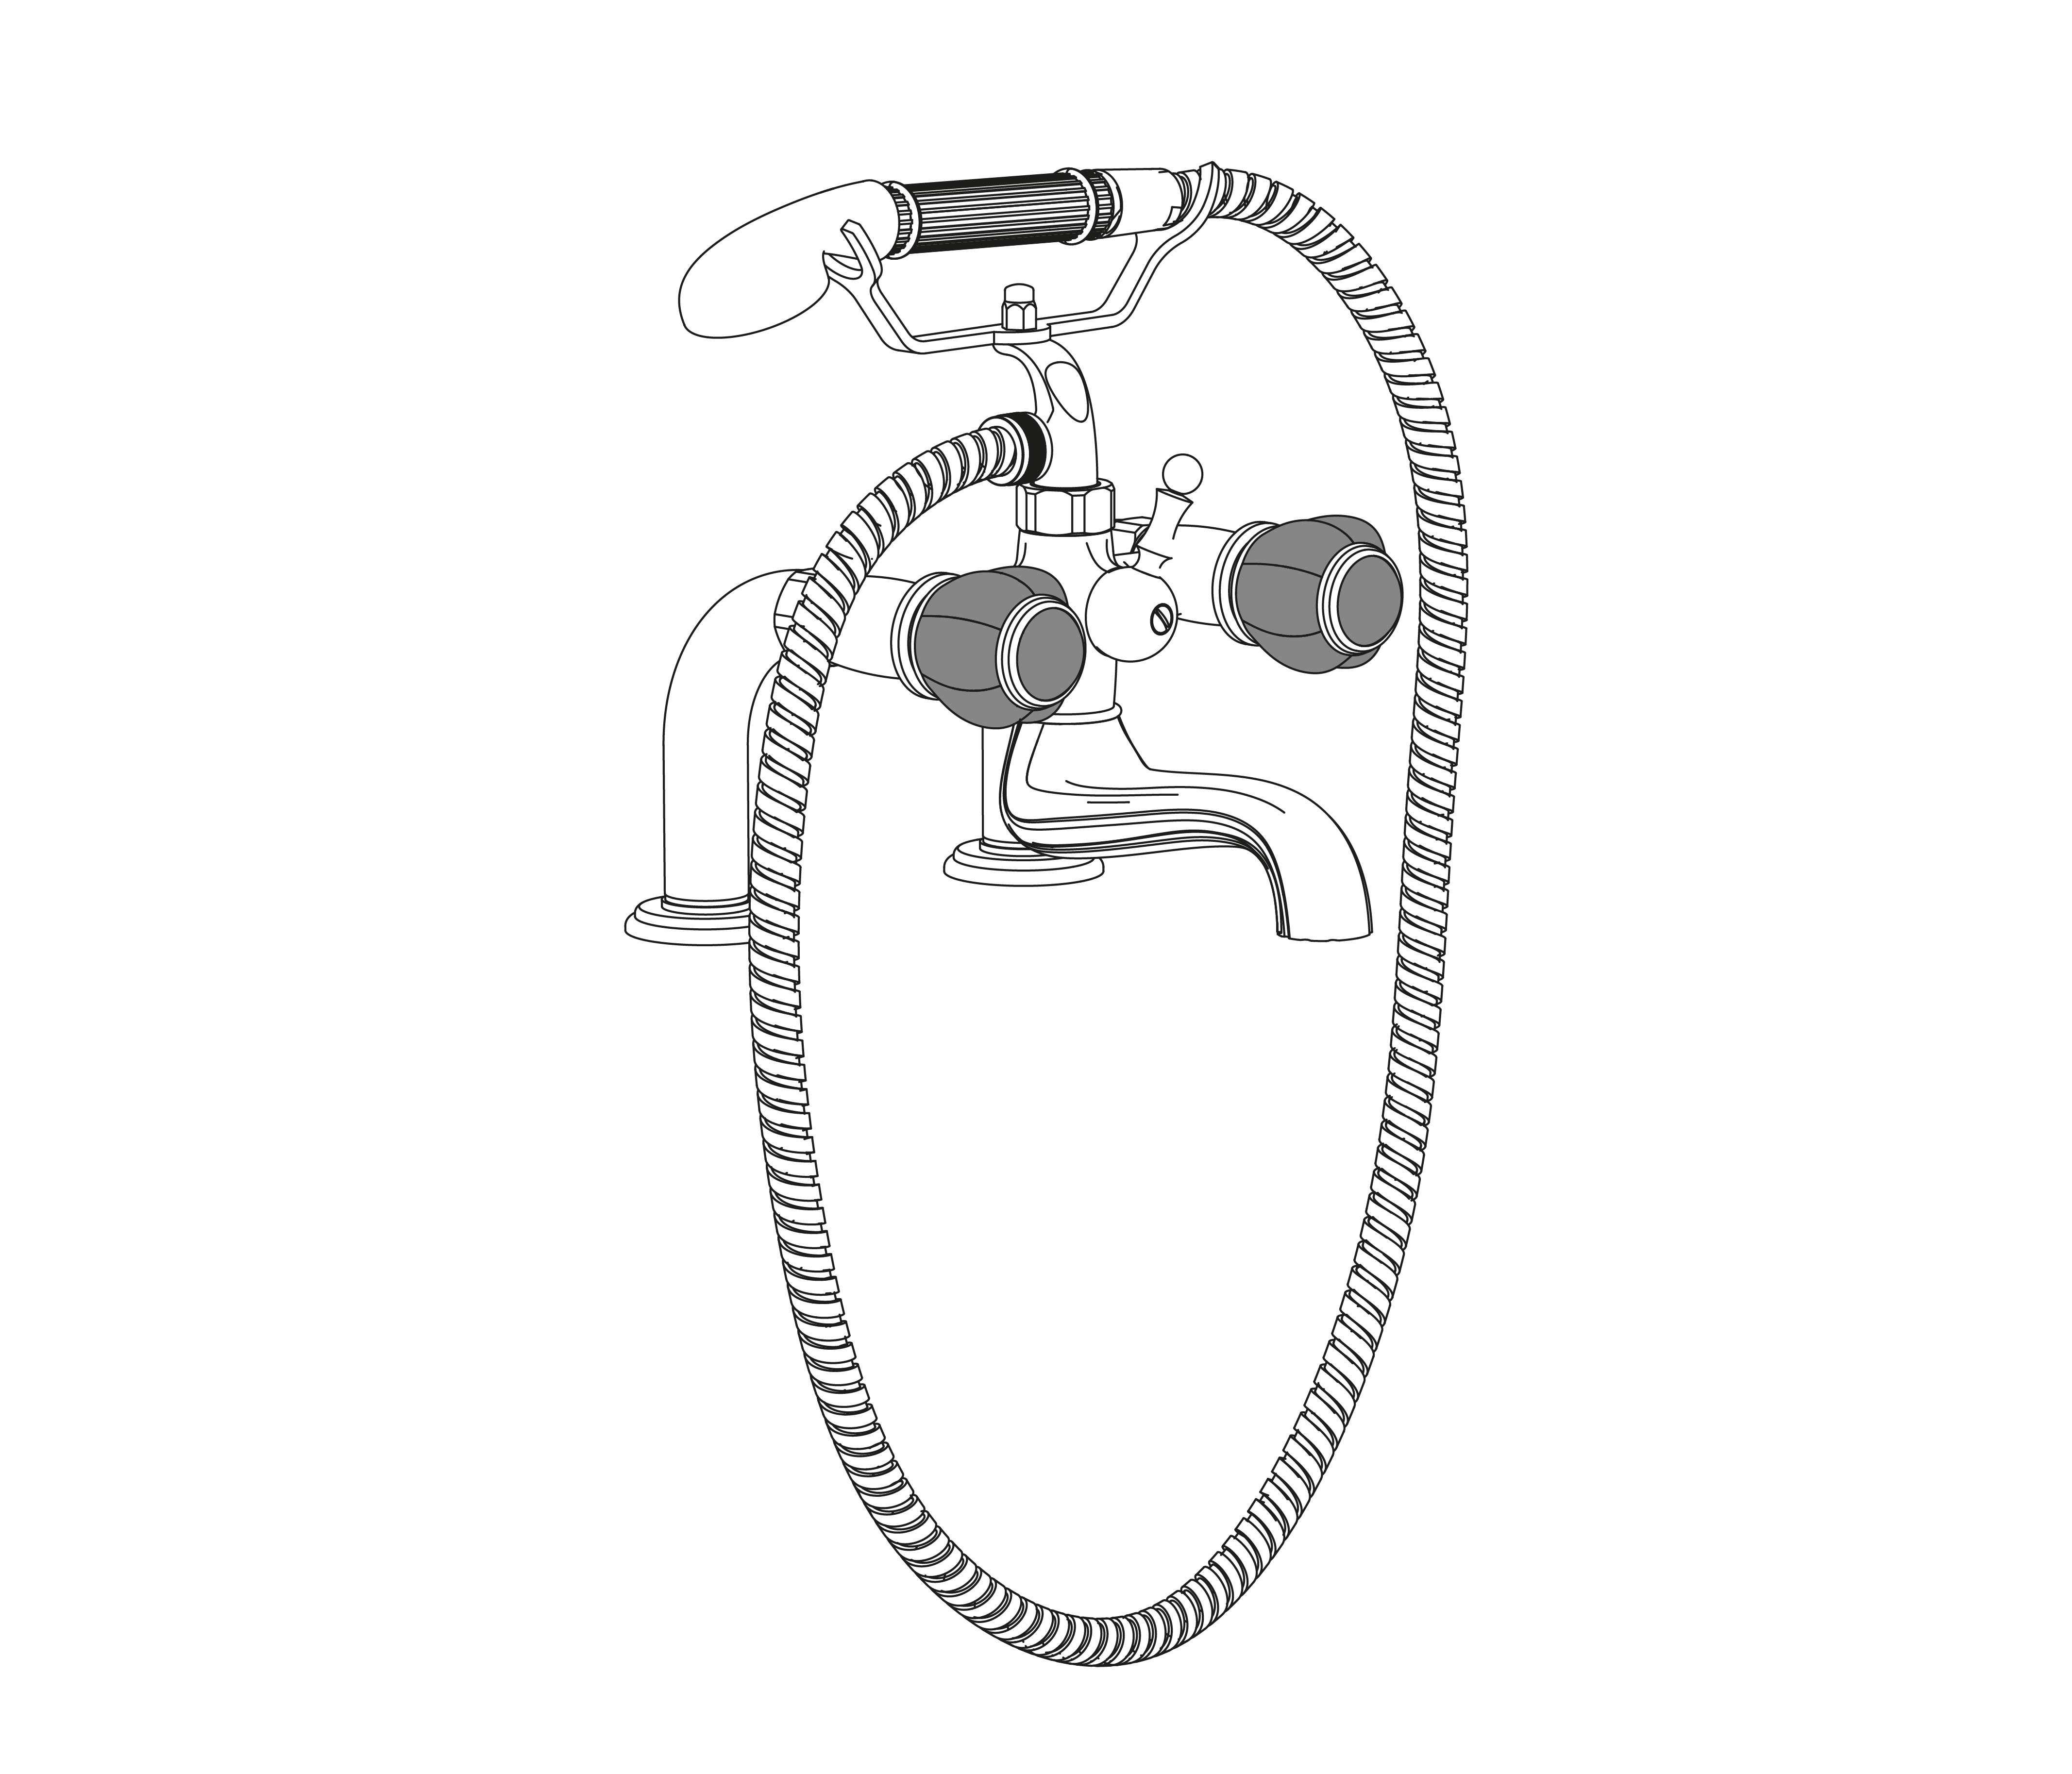 S153-3306 Rim mounted bath and shower mixer